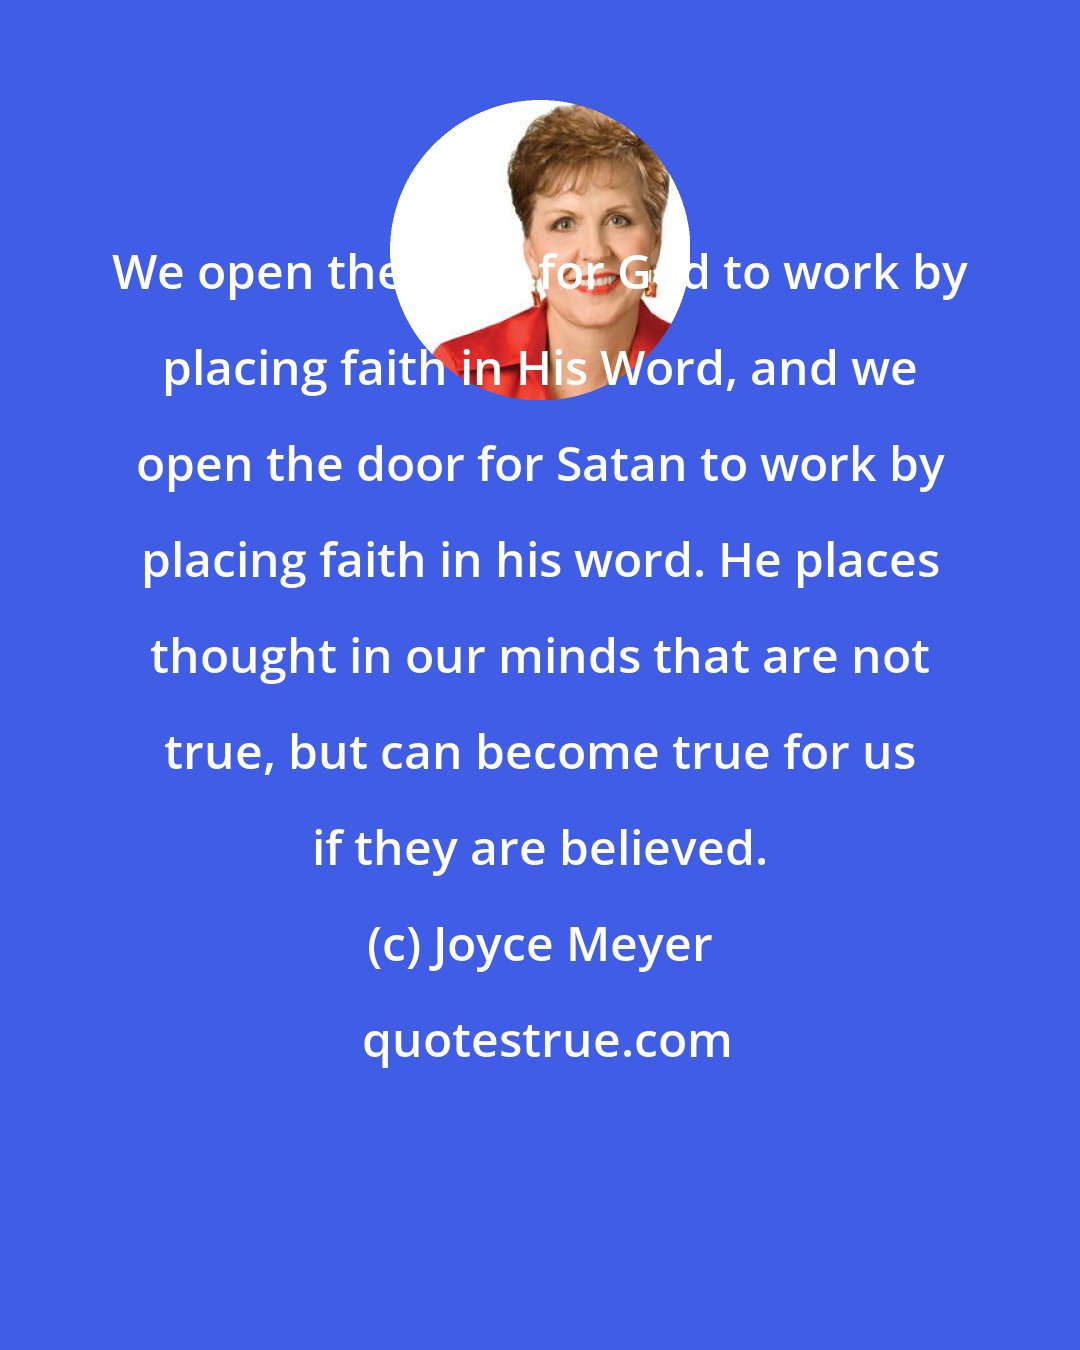 Joyce Meyer: We open the door for God to work by placing faith in His Word, and we open the door for Satan to work by placing faith in his word. He places thought in our minds that are not true, but can become true for us if they are believed.